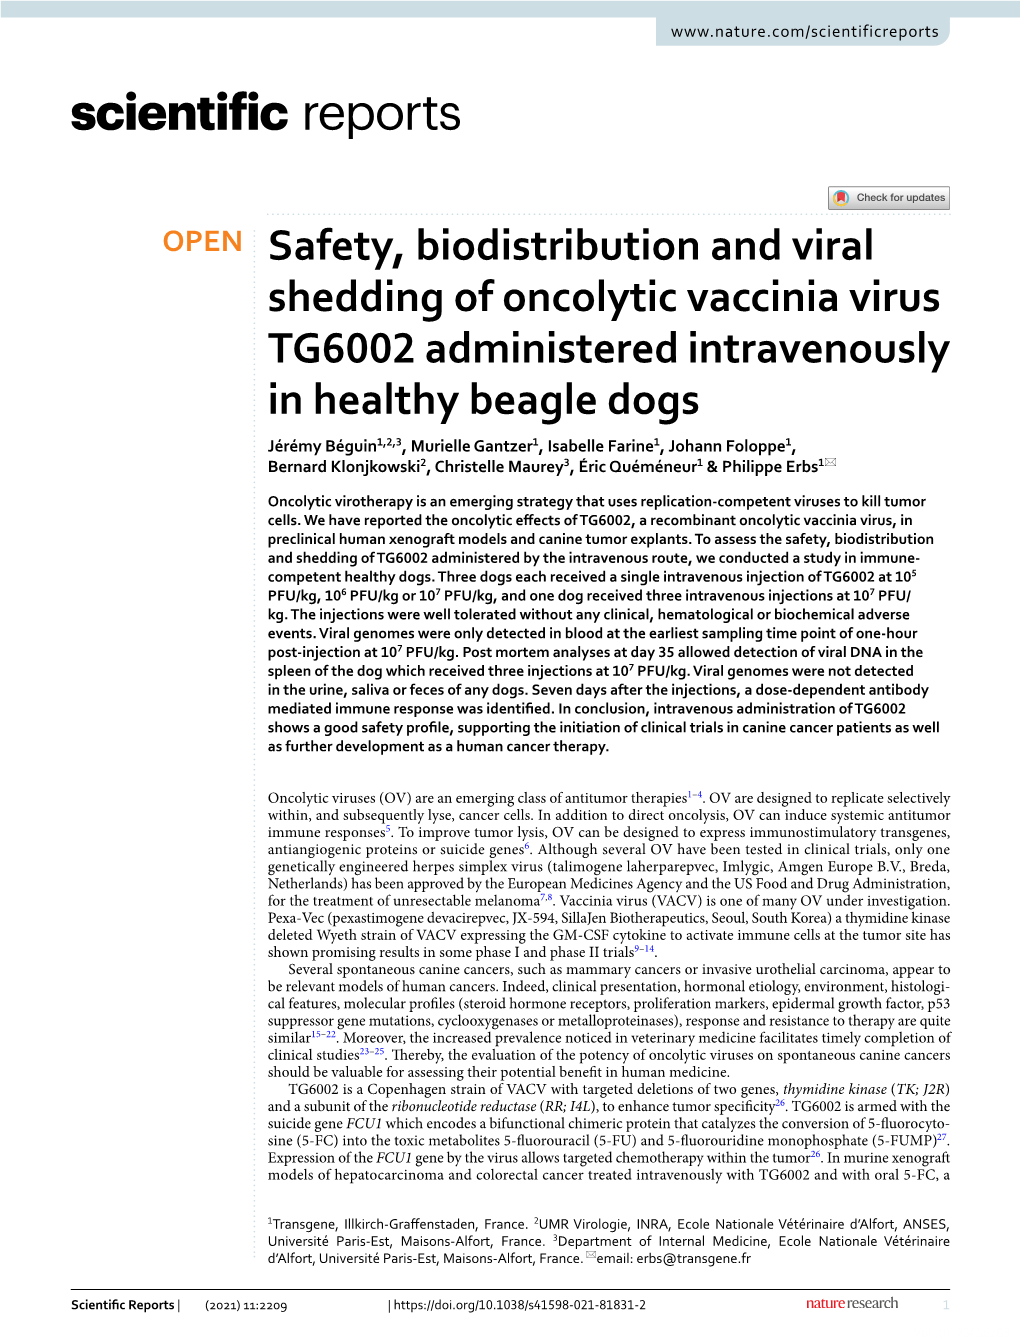 Safety, Biodistribution and Viral Shedding of Oncolytic Vaccinia Virus